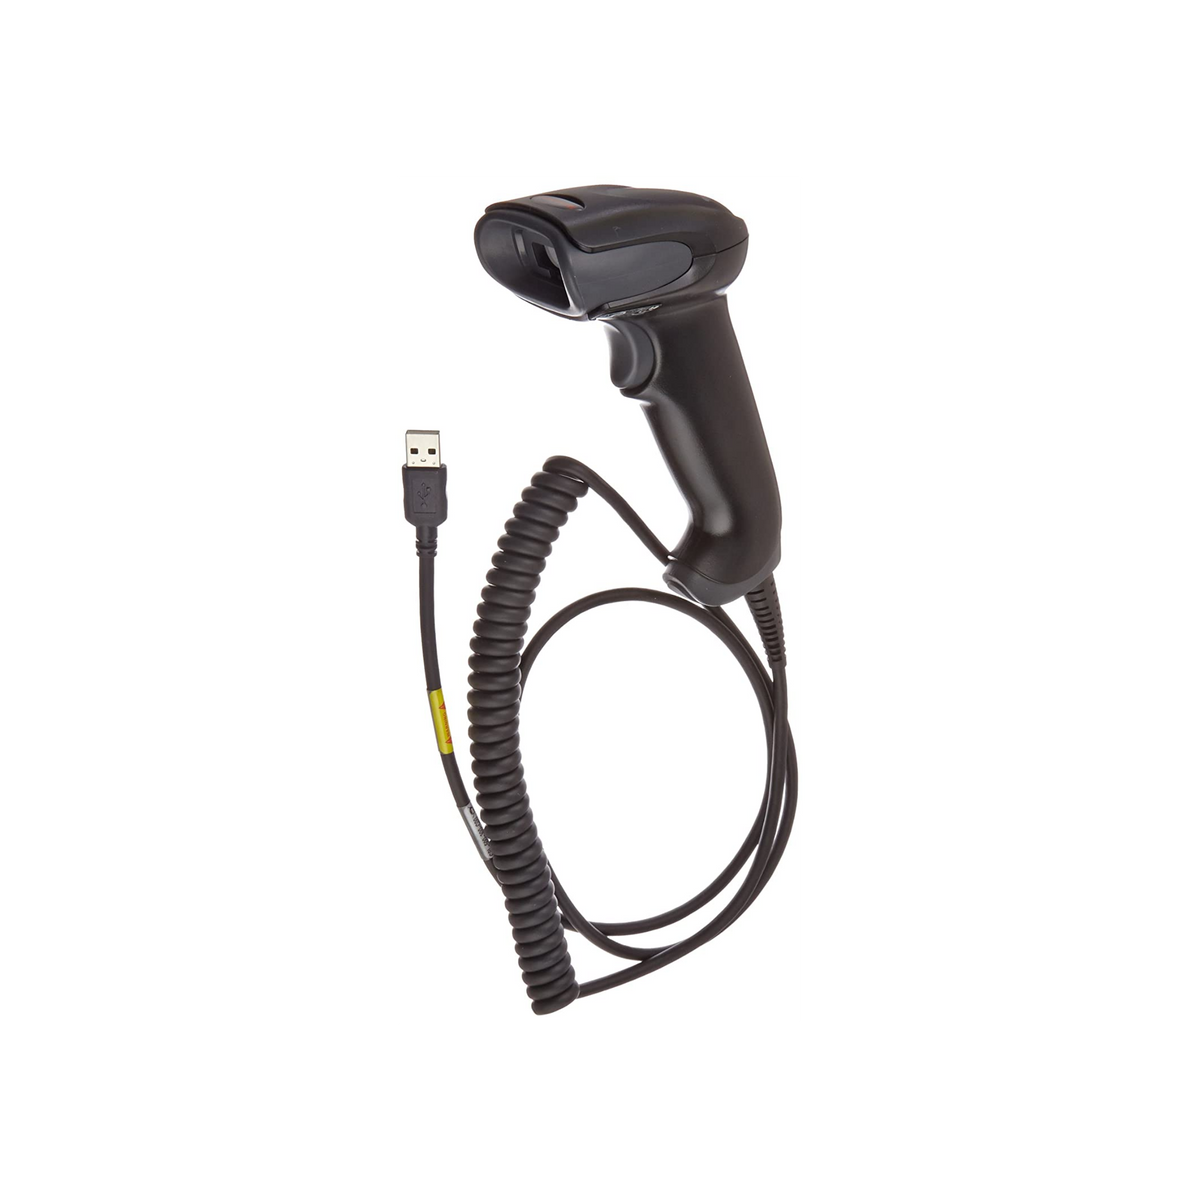 Honeywell 1250G, USB Kit, 1D, Black Scanner (1250G-2), No Presentation Stand, USB Type A 3M Coiled Cable (Cbl-500-300-C00) and Documentation